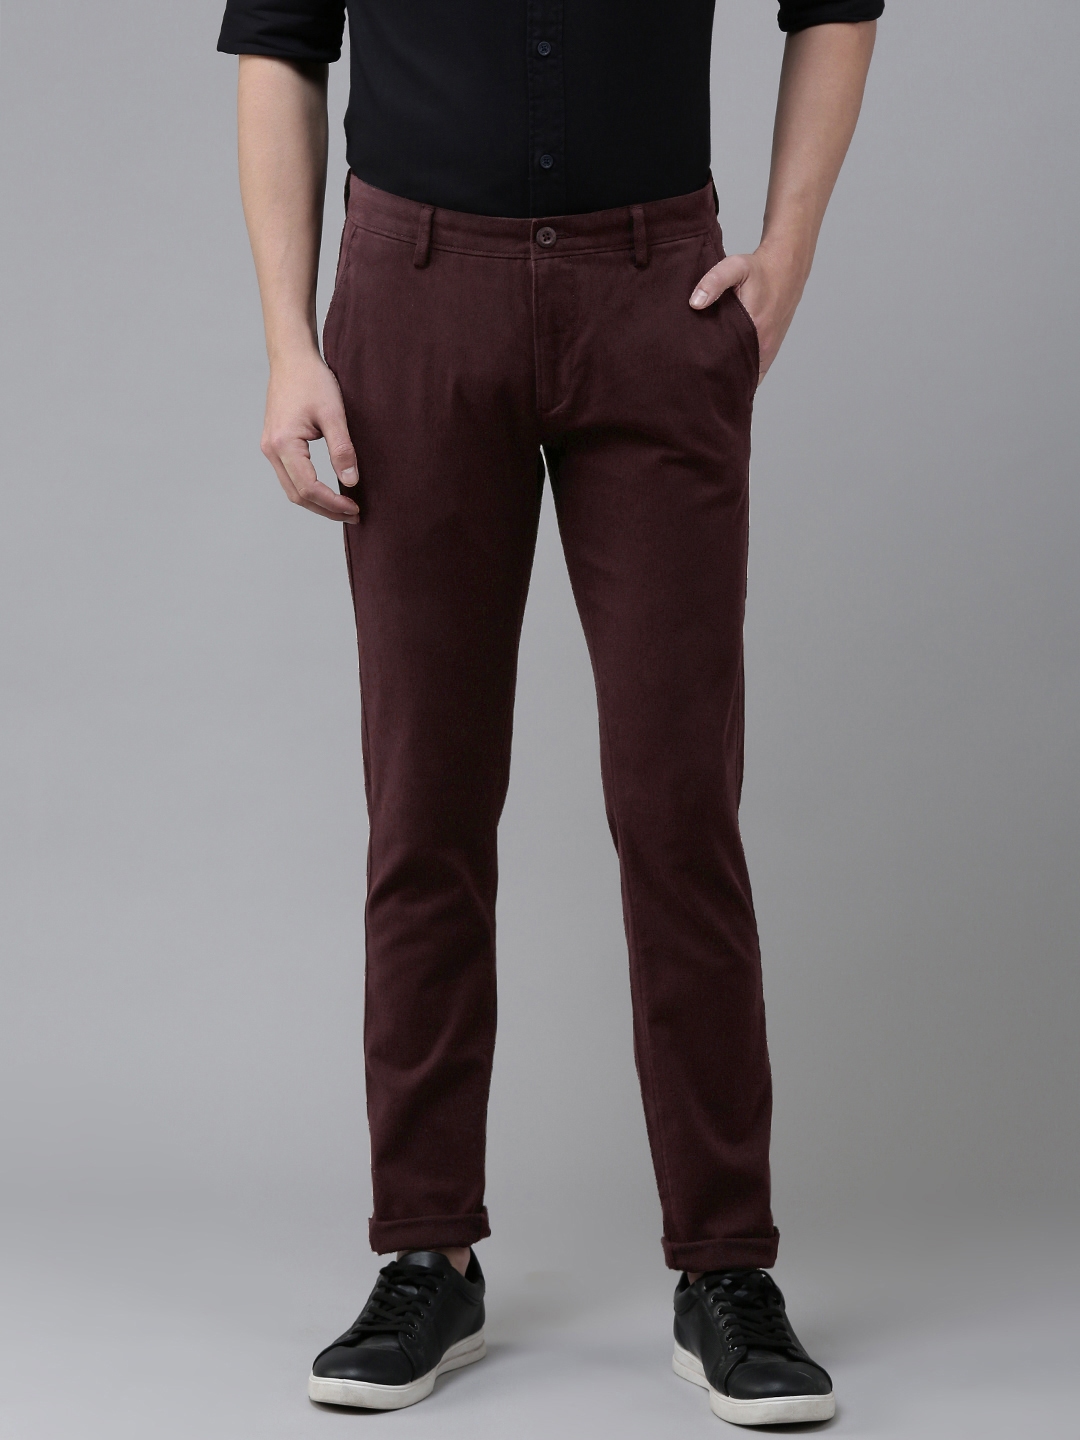 Cotton Black Ankle formal pant mens wear, Flat Trousers at Rs 499